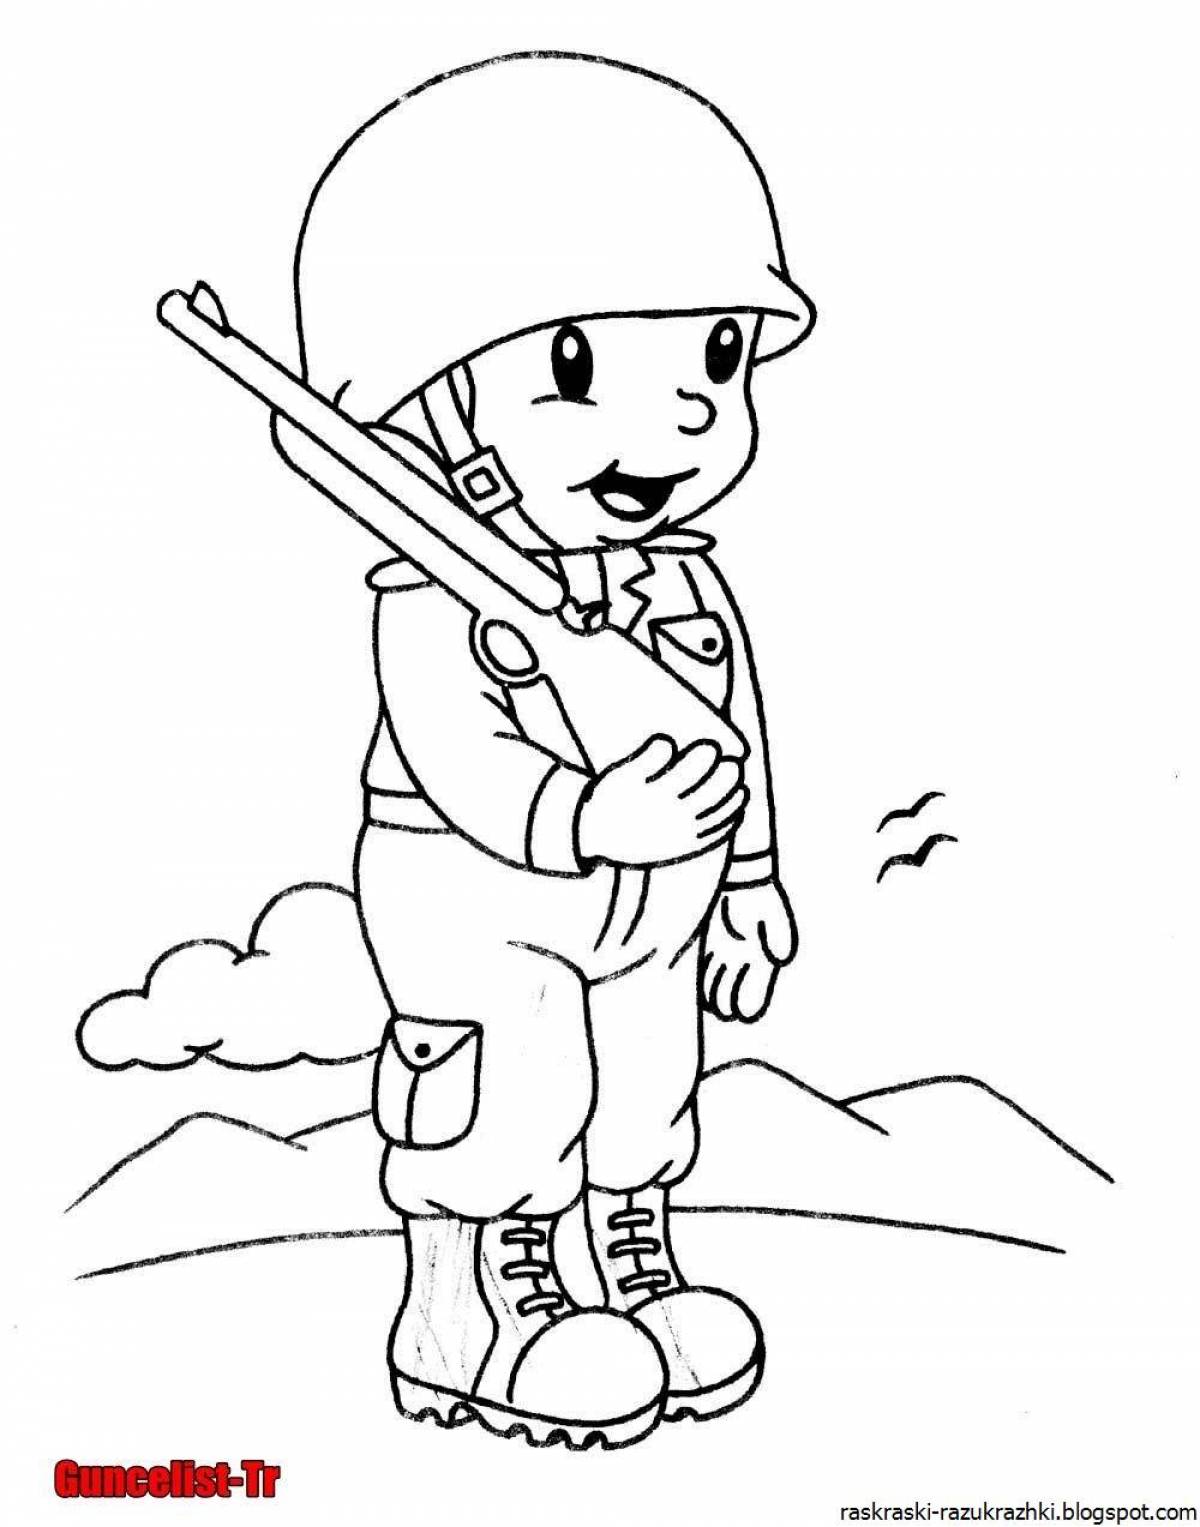 Living soldier coloring book for kids